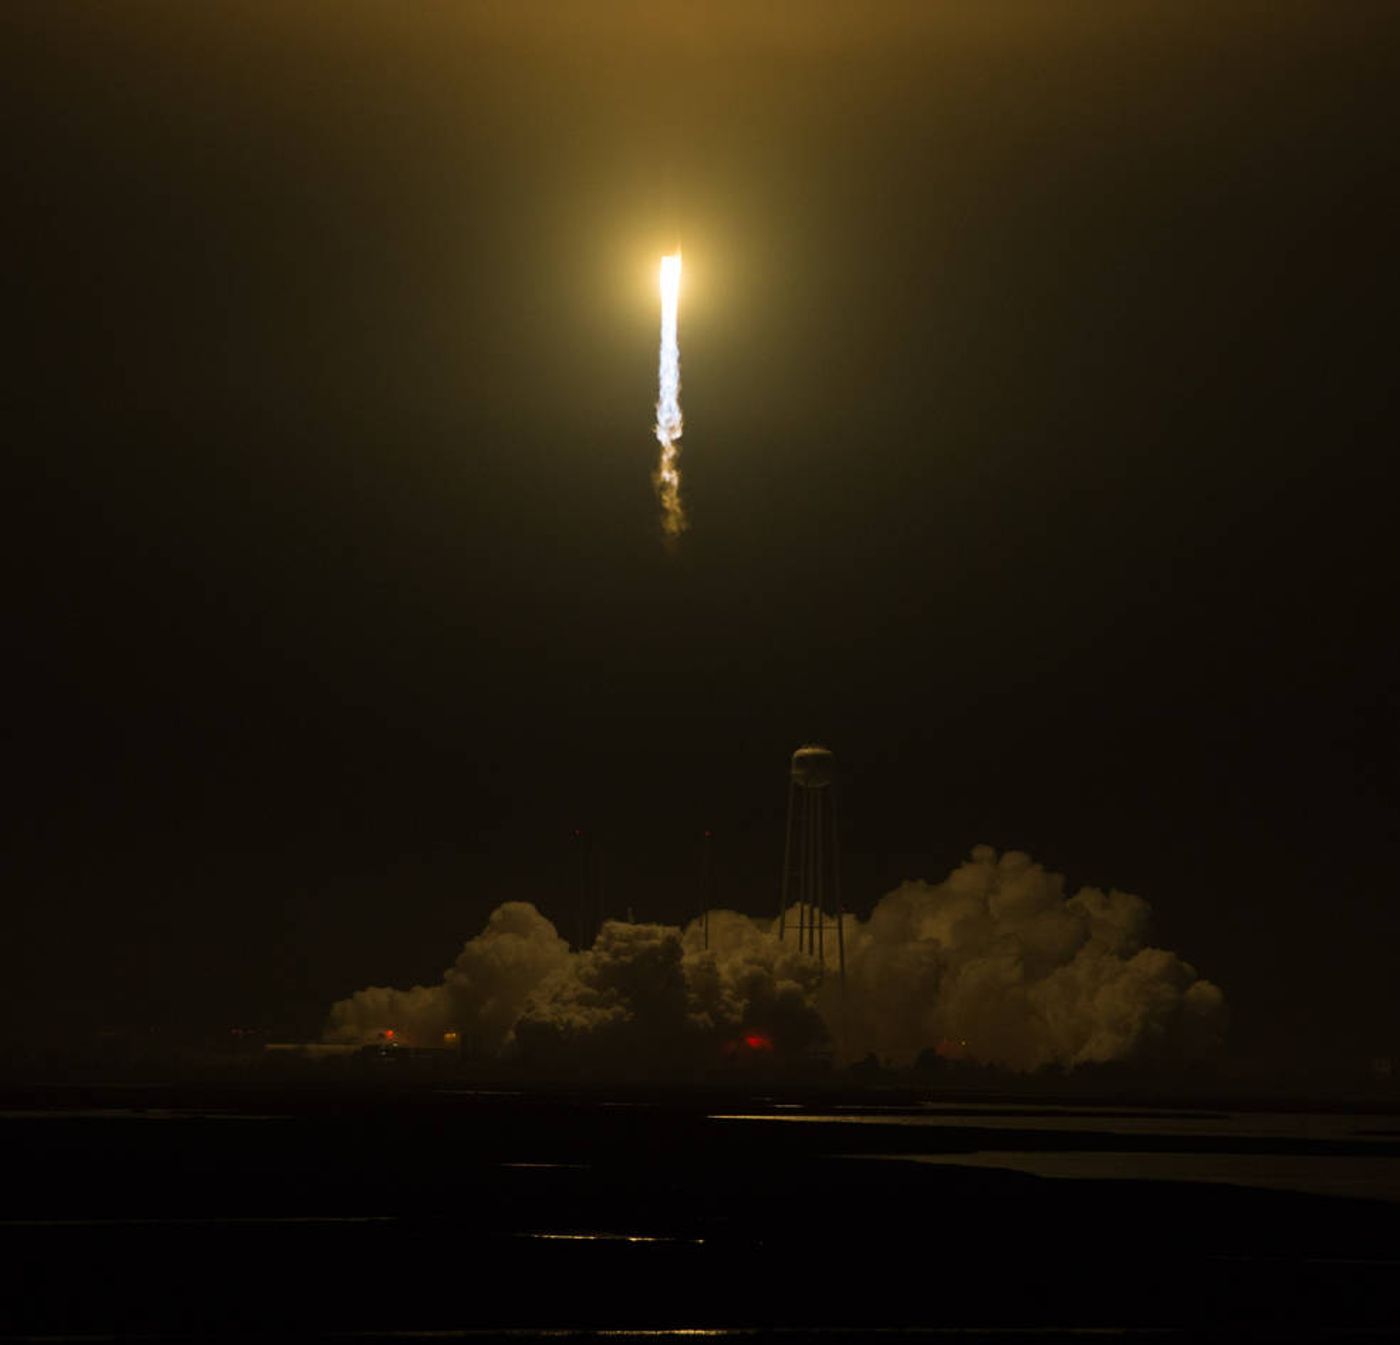 A look at the launch of Orbital ATK's Antares rocket from Monday morning.